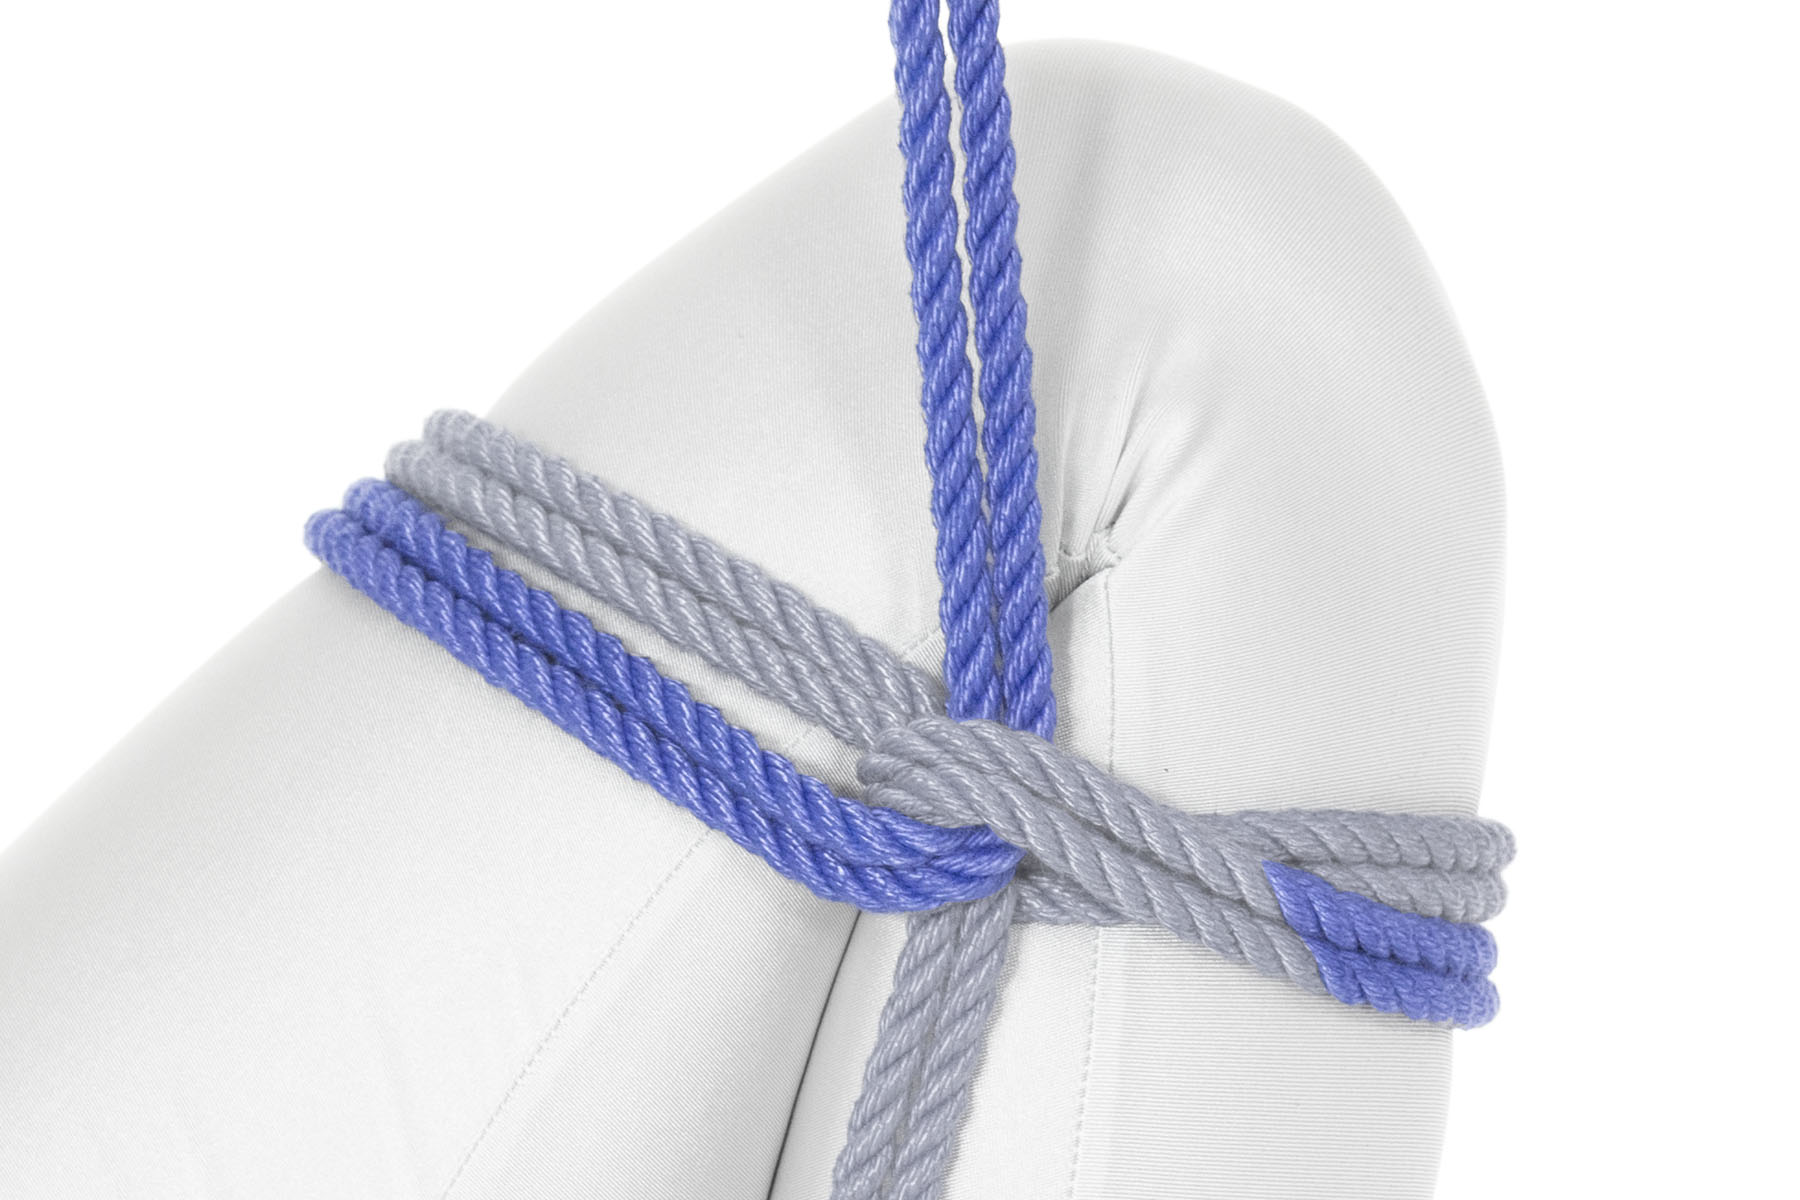 The rope makes a complete counter-clockwise wrap around the leg, just below the first wrap. It then goes through the U of the first reverse tension and reverses direction, making a second reverse tension.